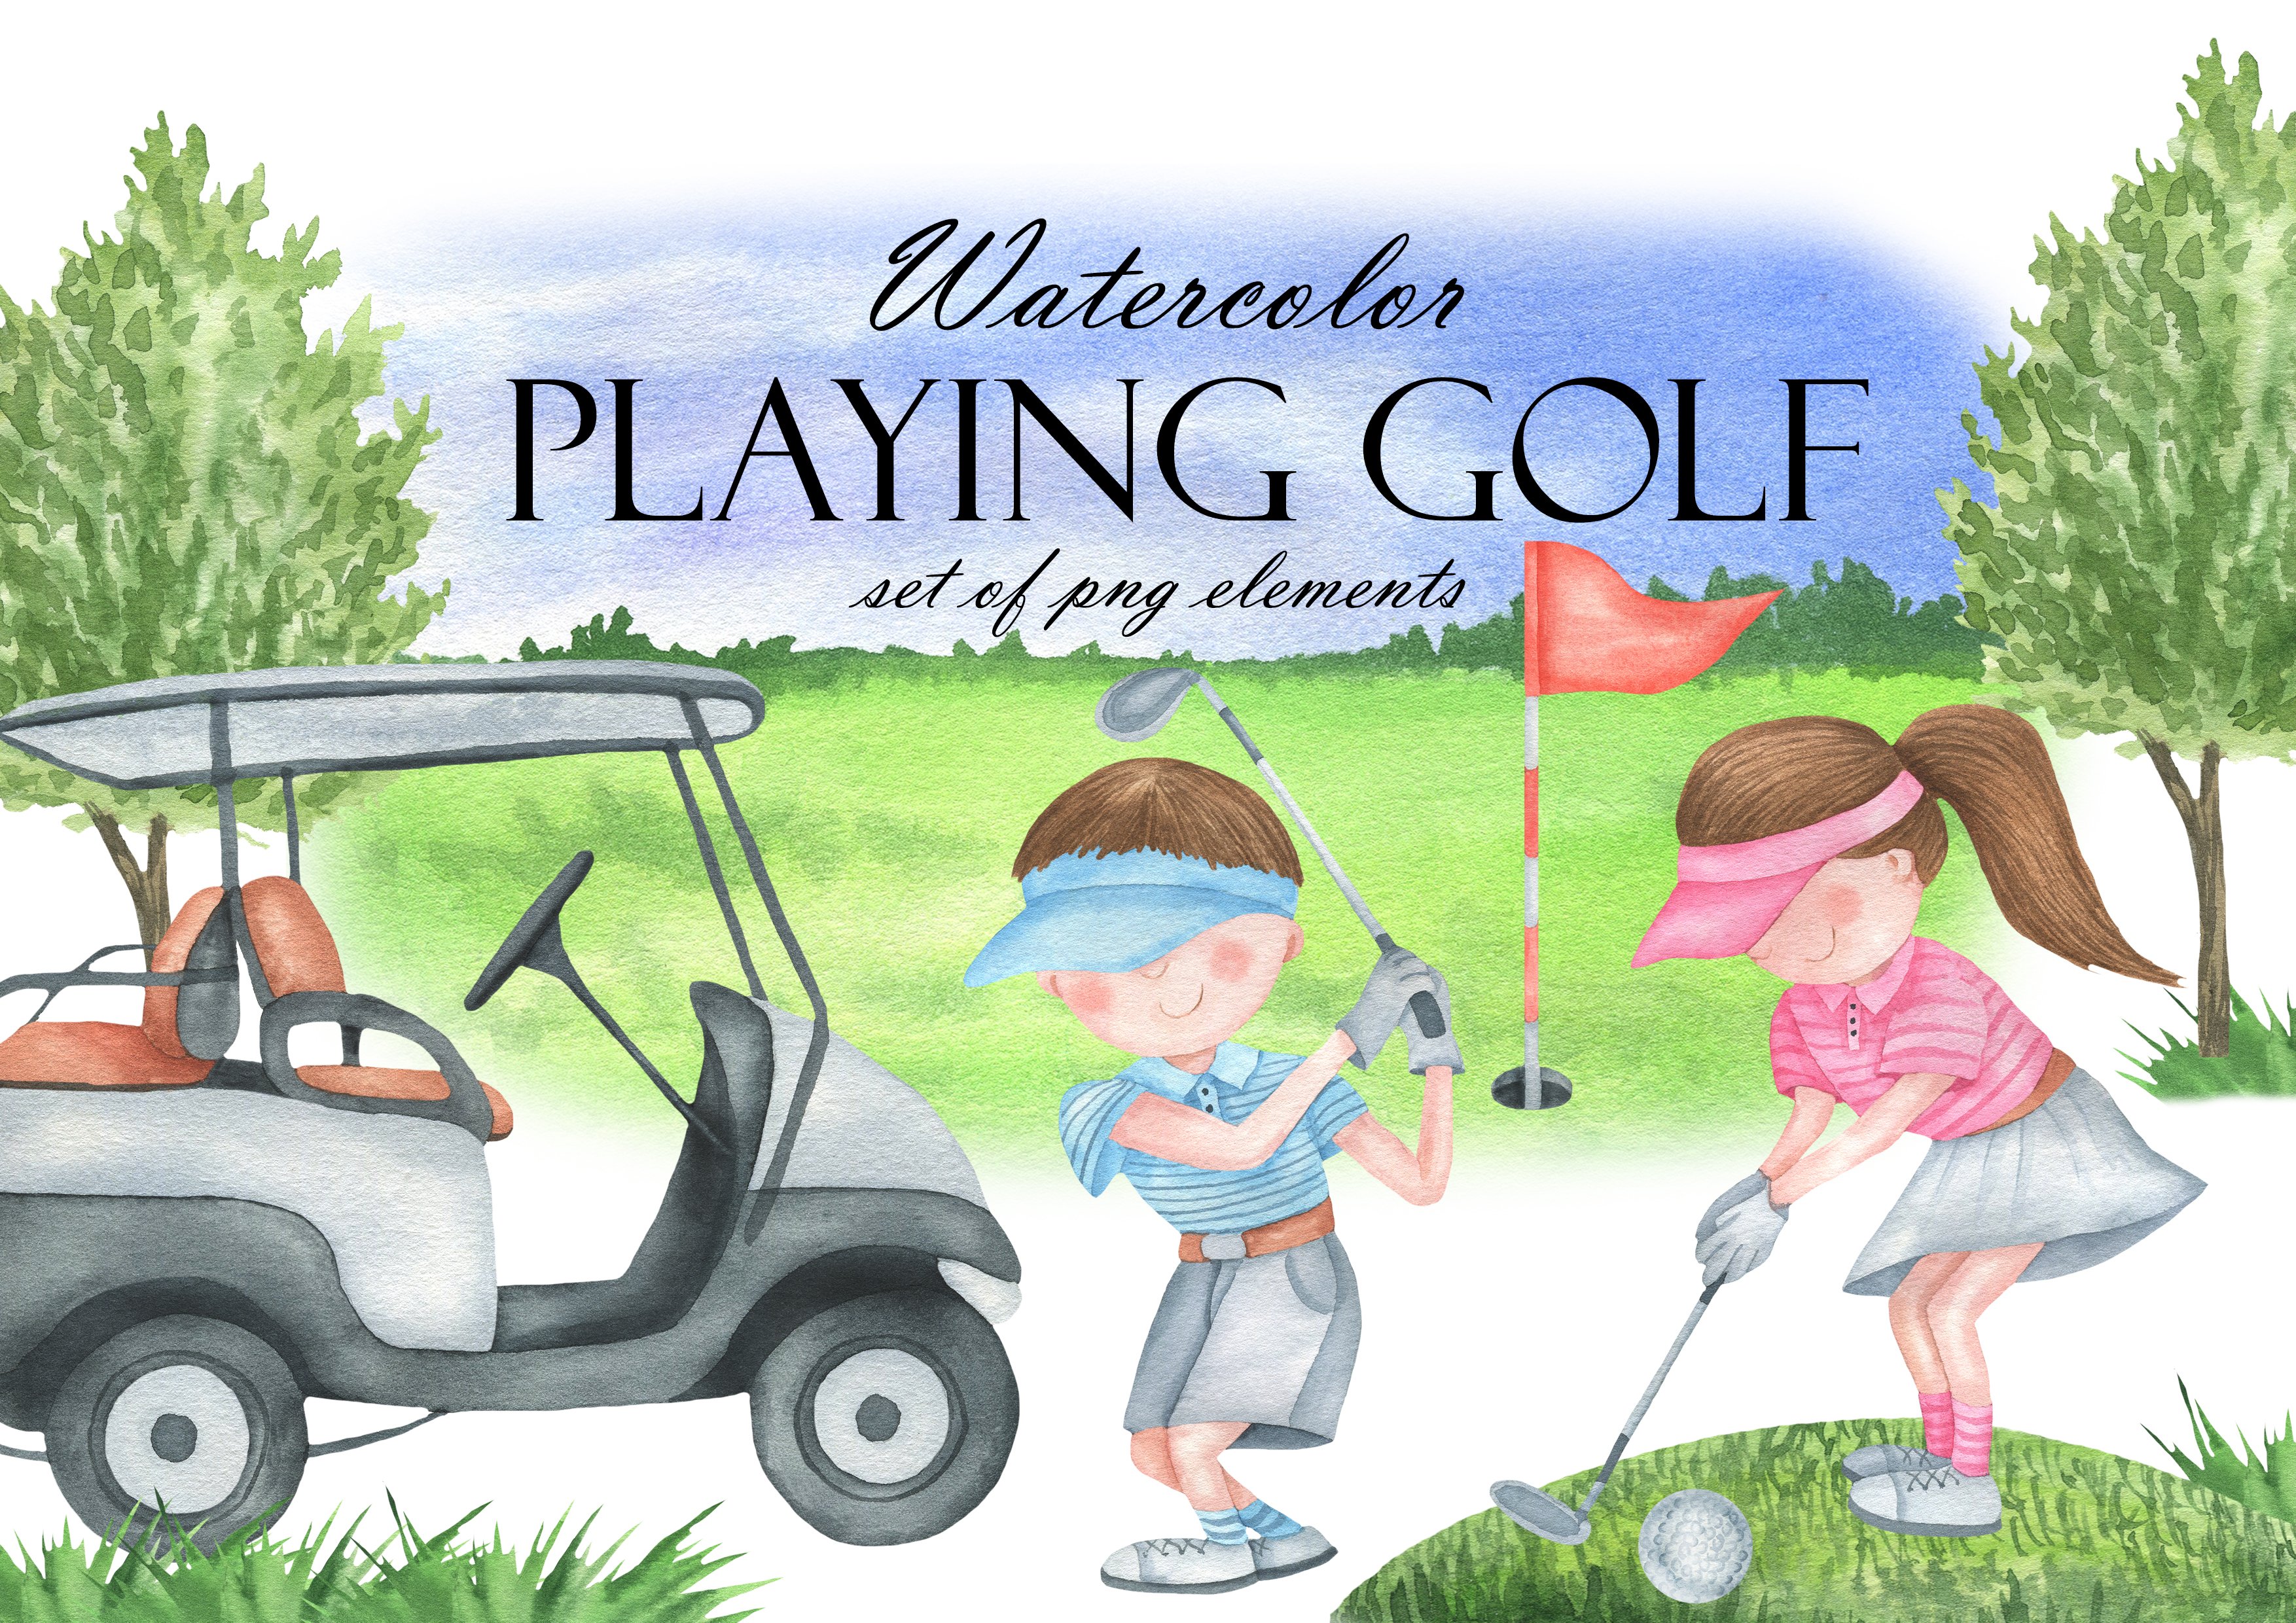 Watercolor Golf cover image.